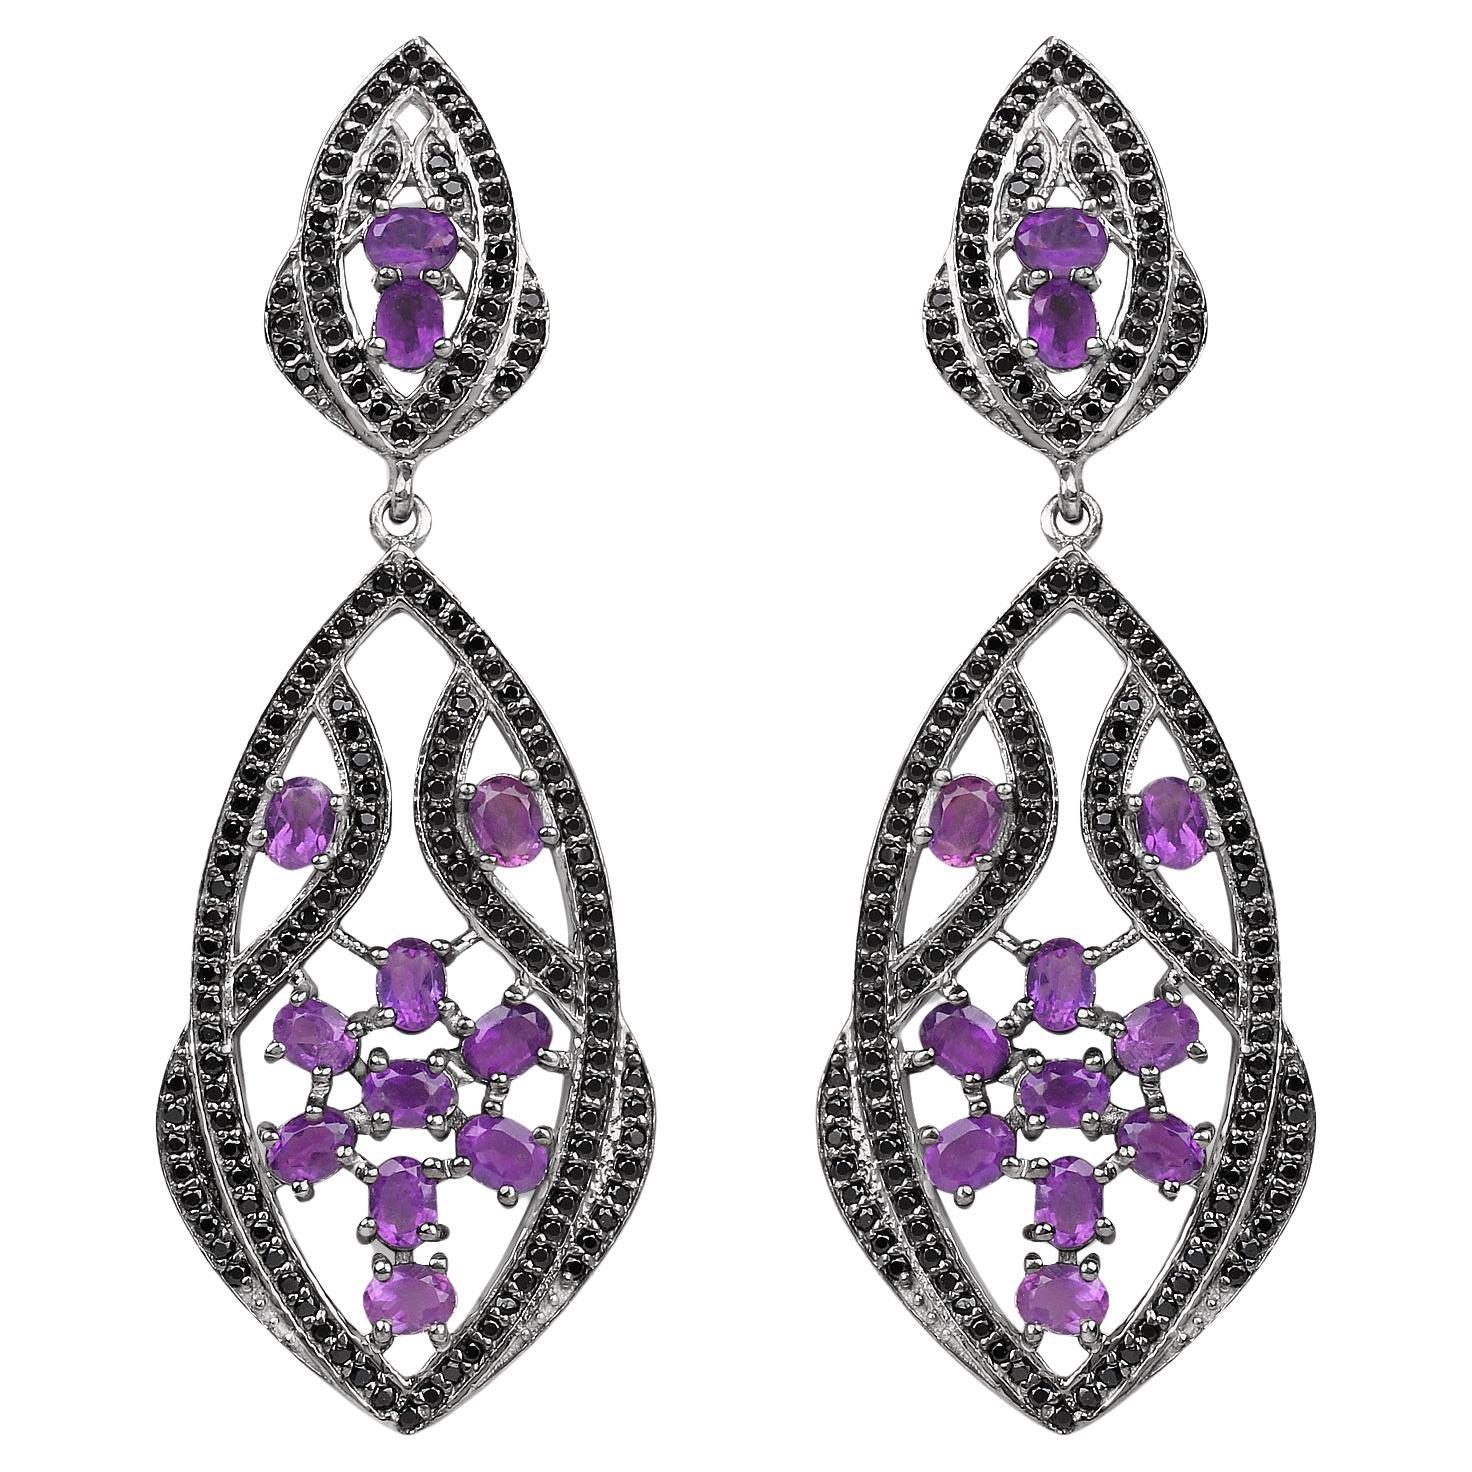 Amethyst Earrings With Black Spinels 5.74 Carats Rhodium Plated Sterling Silver